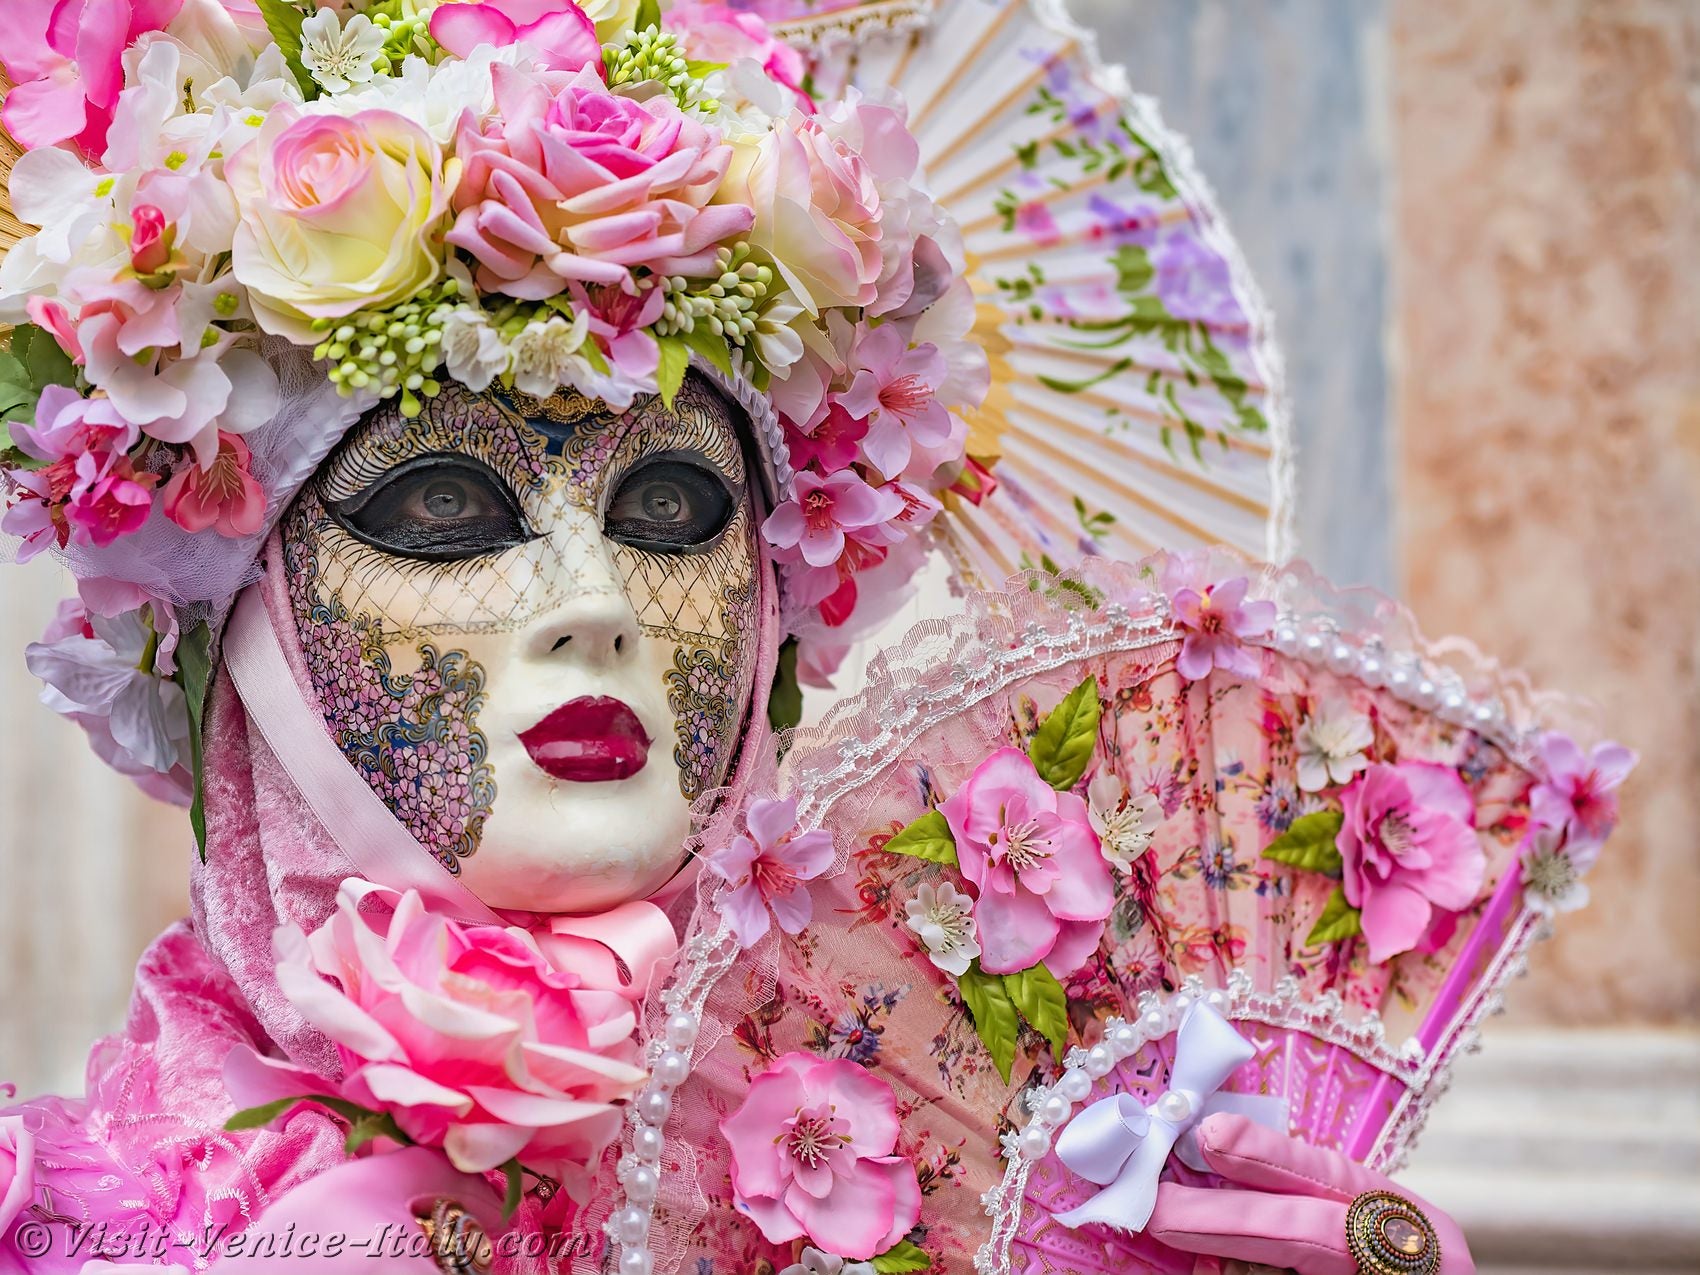 History Of The Carnival In Venice Masks Joy And Pleasures